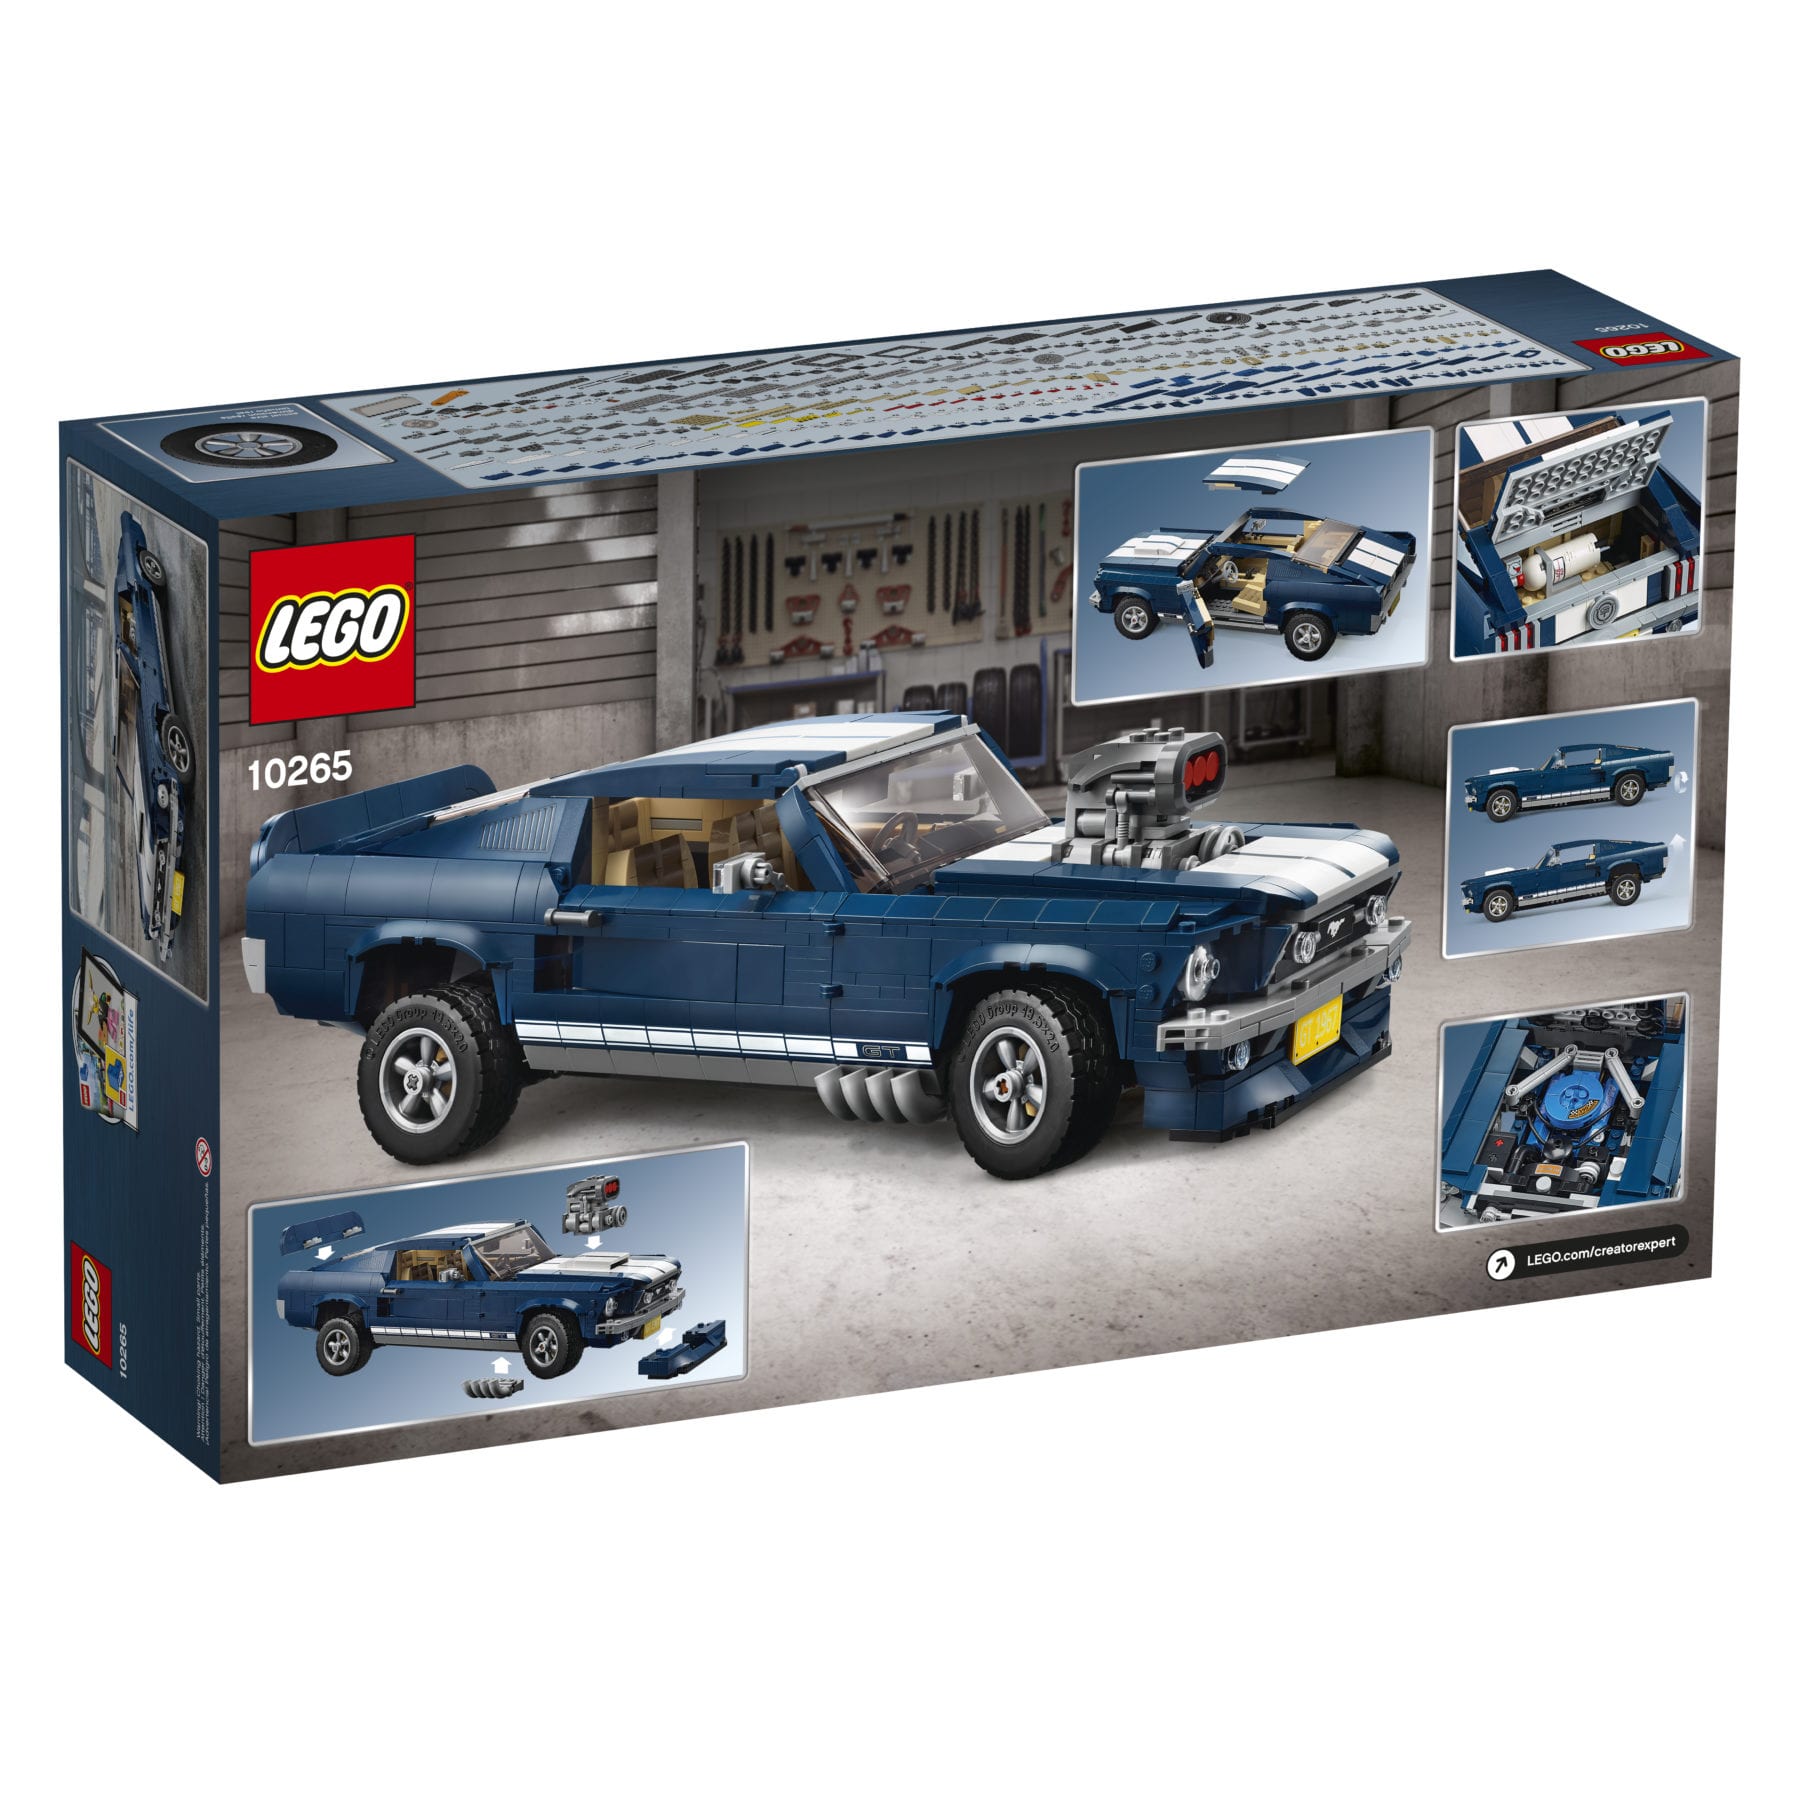 1960s customizable LEGO Ford Mustang